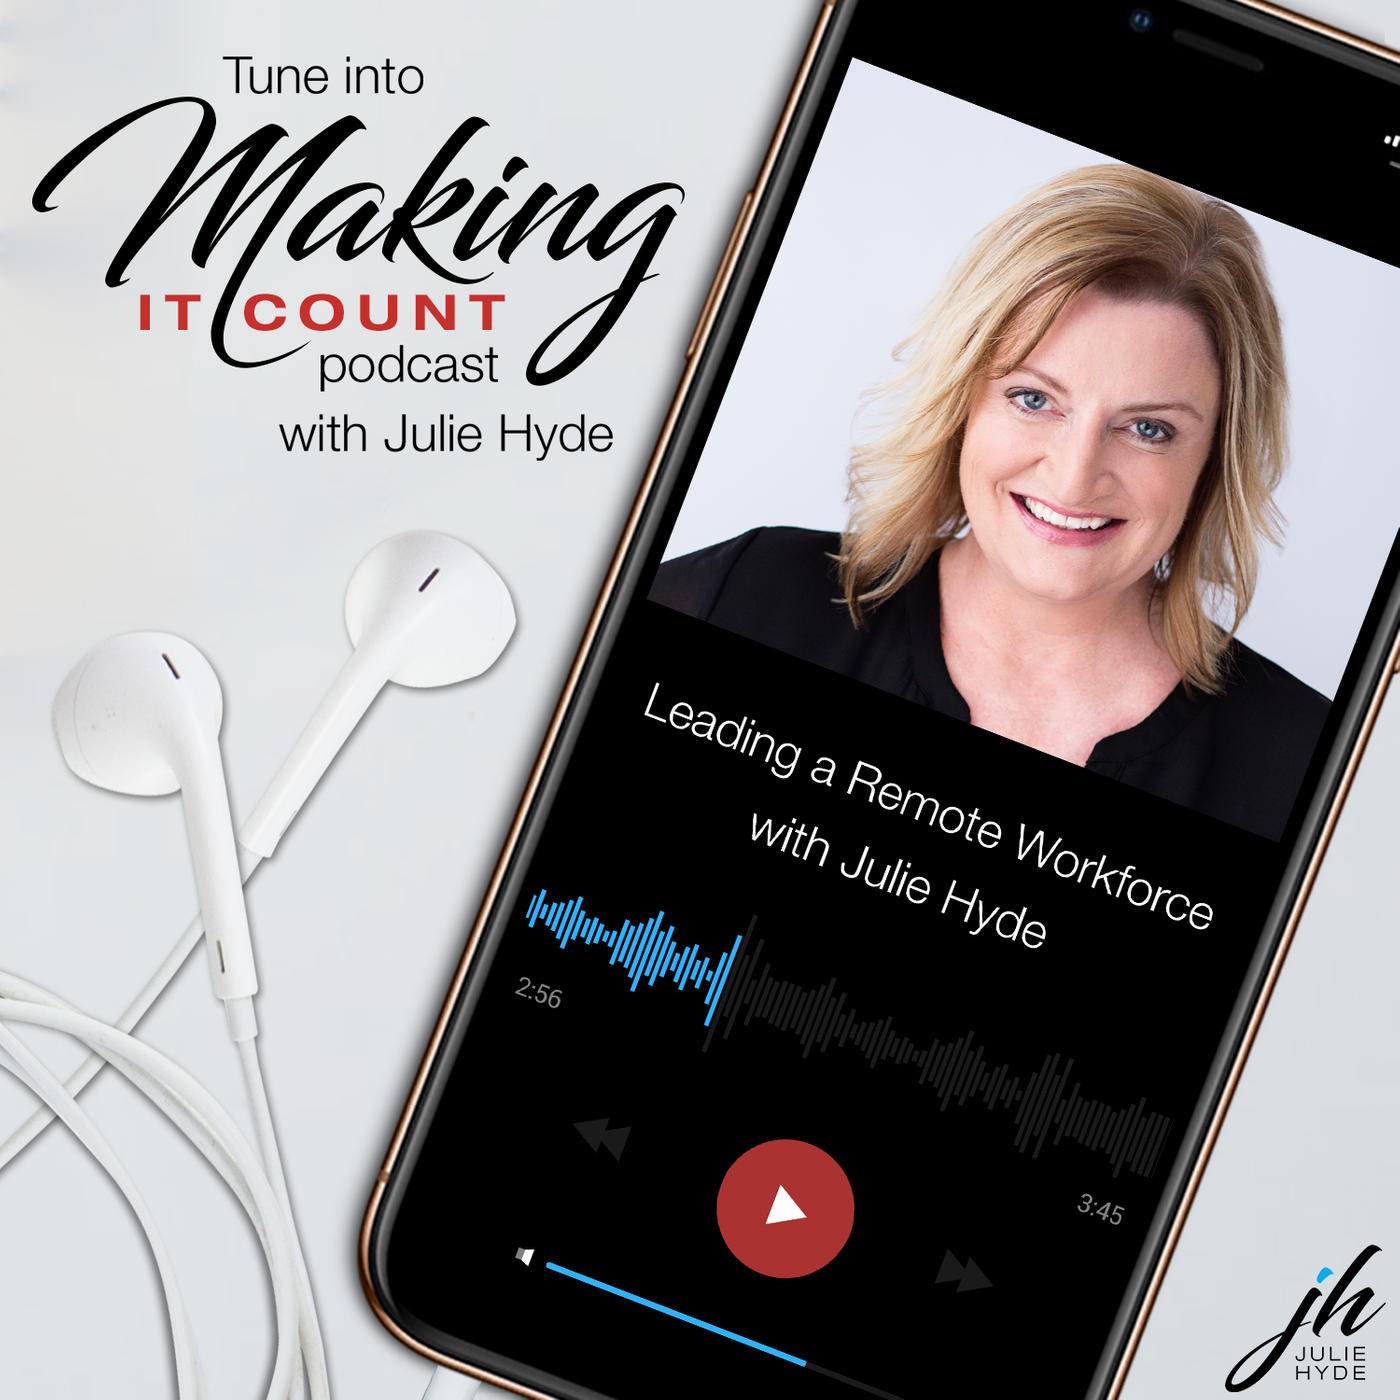 Leading a Remote Workforce with Julie Hyde